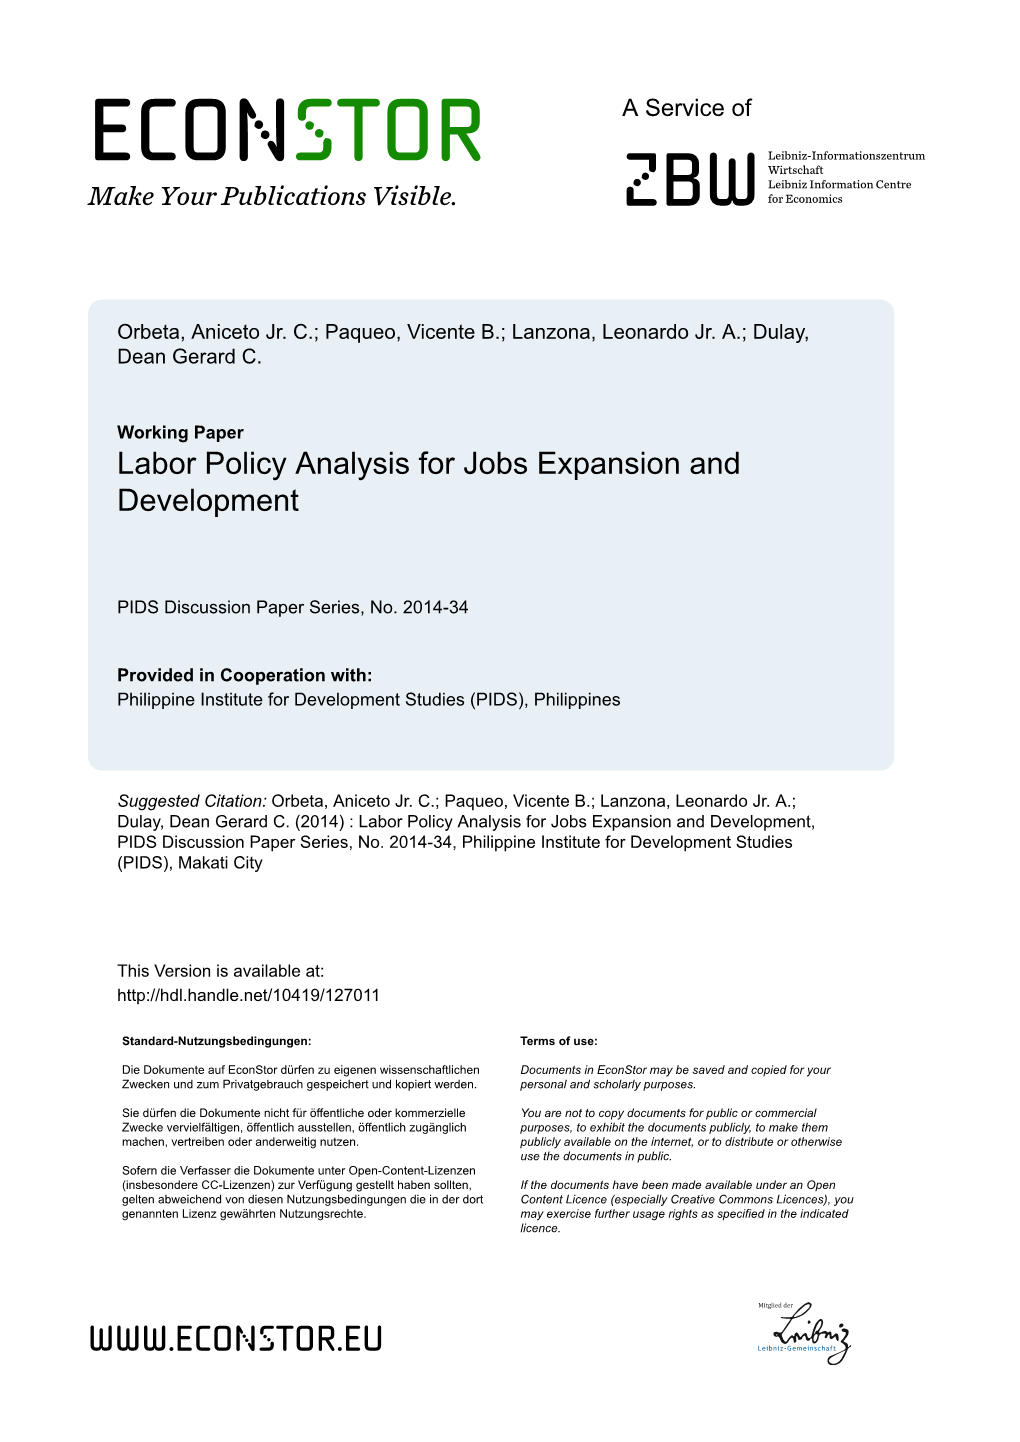 Labor Policy Analysis for Jobs Expansion and Development